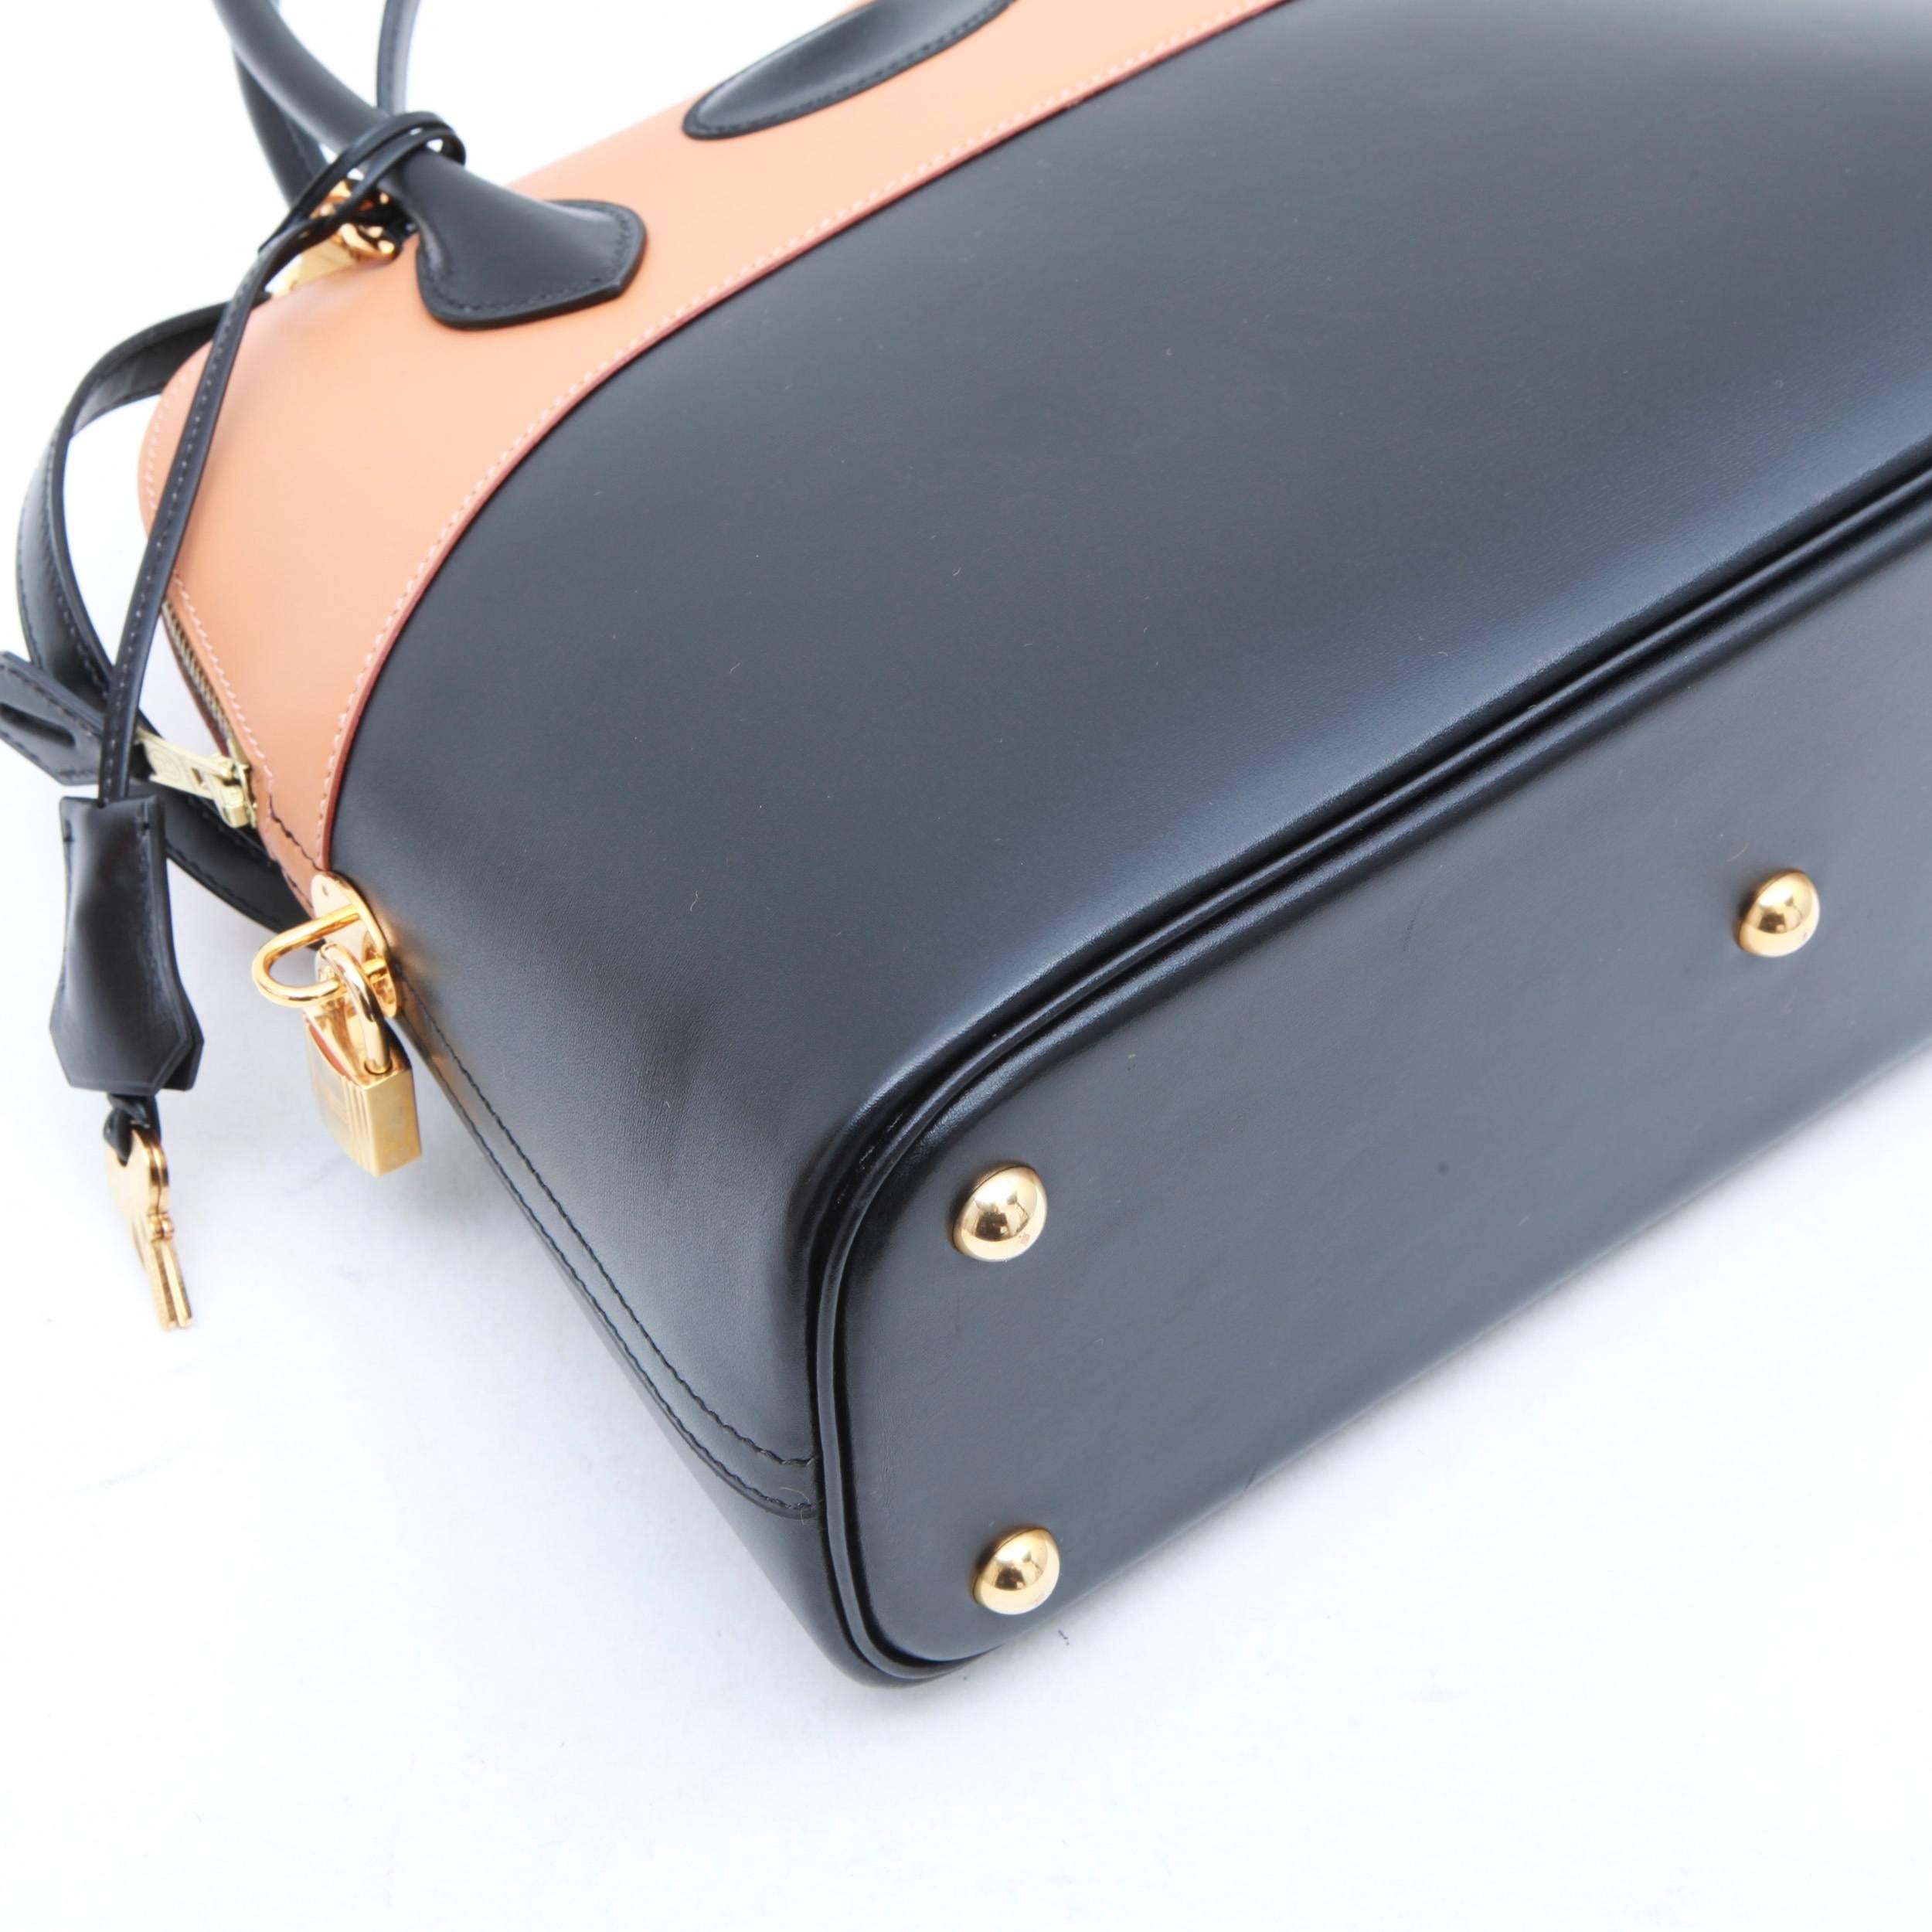 HERMES 'Bolide' Bag in Two-Tone Gold and Black Box Leather 1